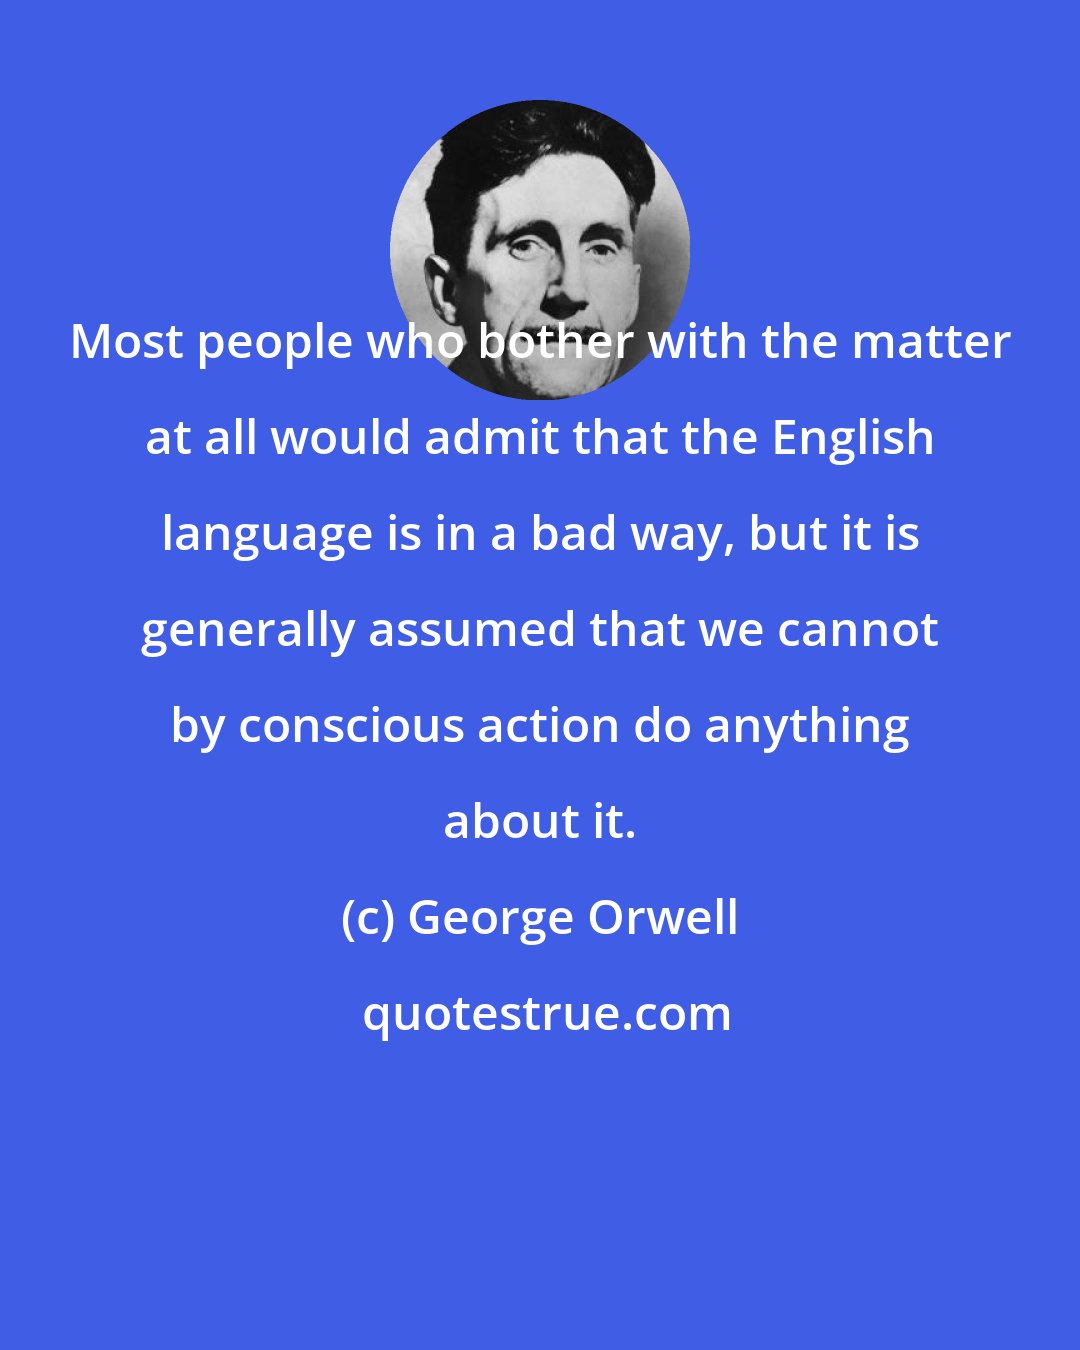 George Orwell: Most people who bother with the matter at all would admit that the English language is in a bad way, but it is generally assumed that we cannot by conscious action do anything about it.